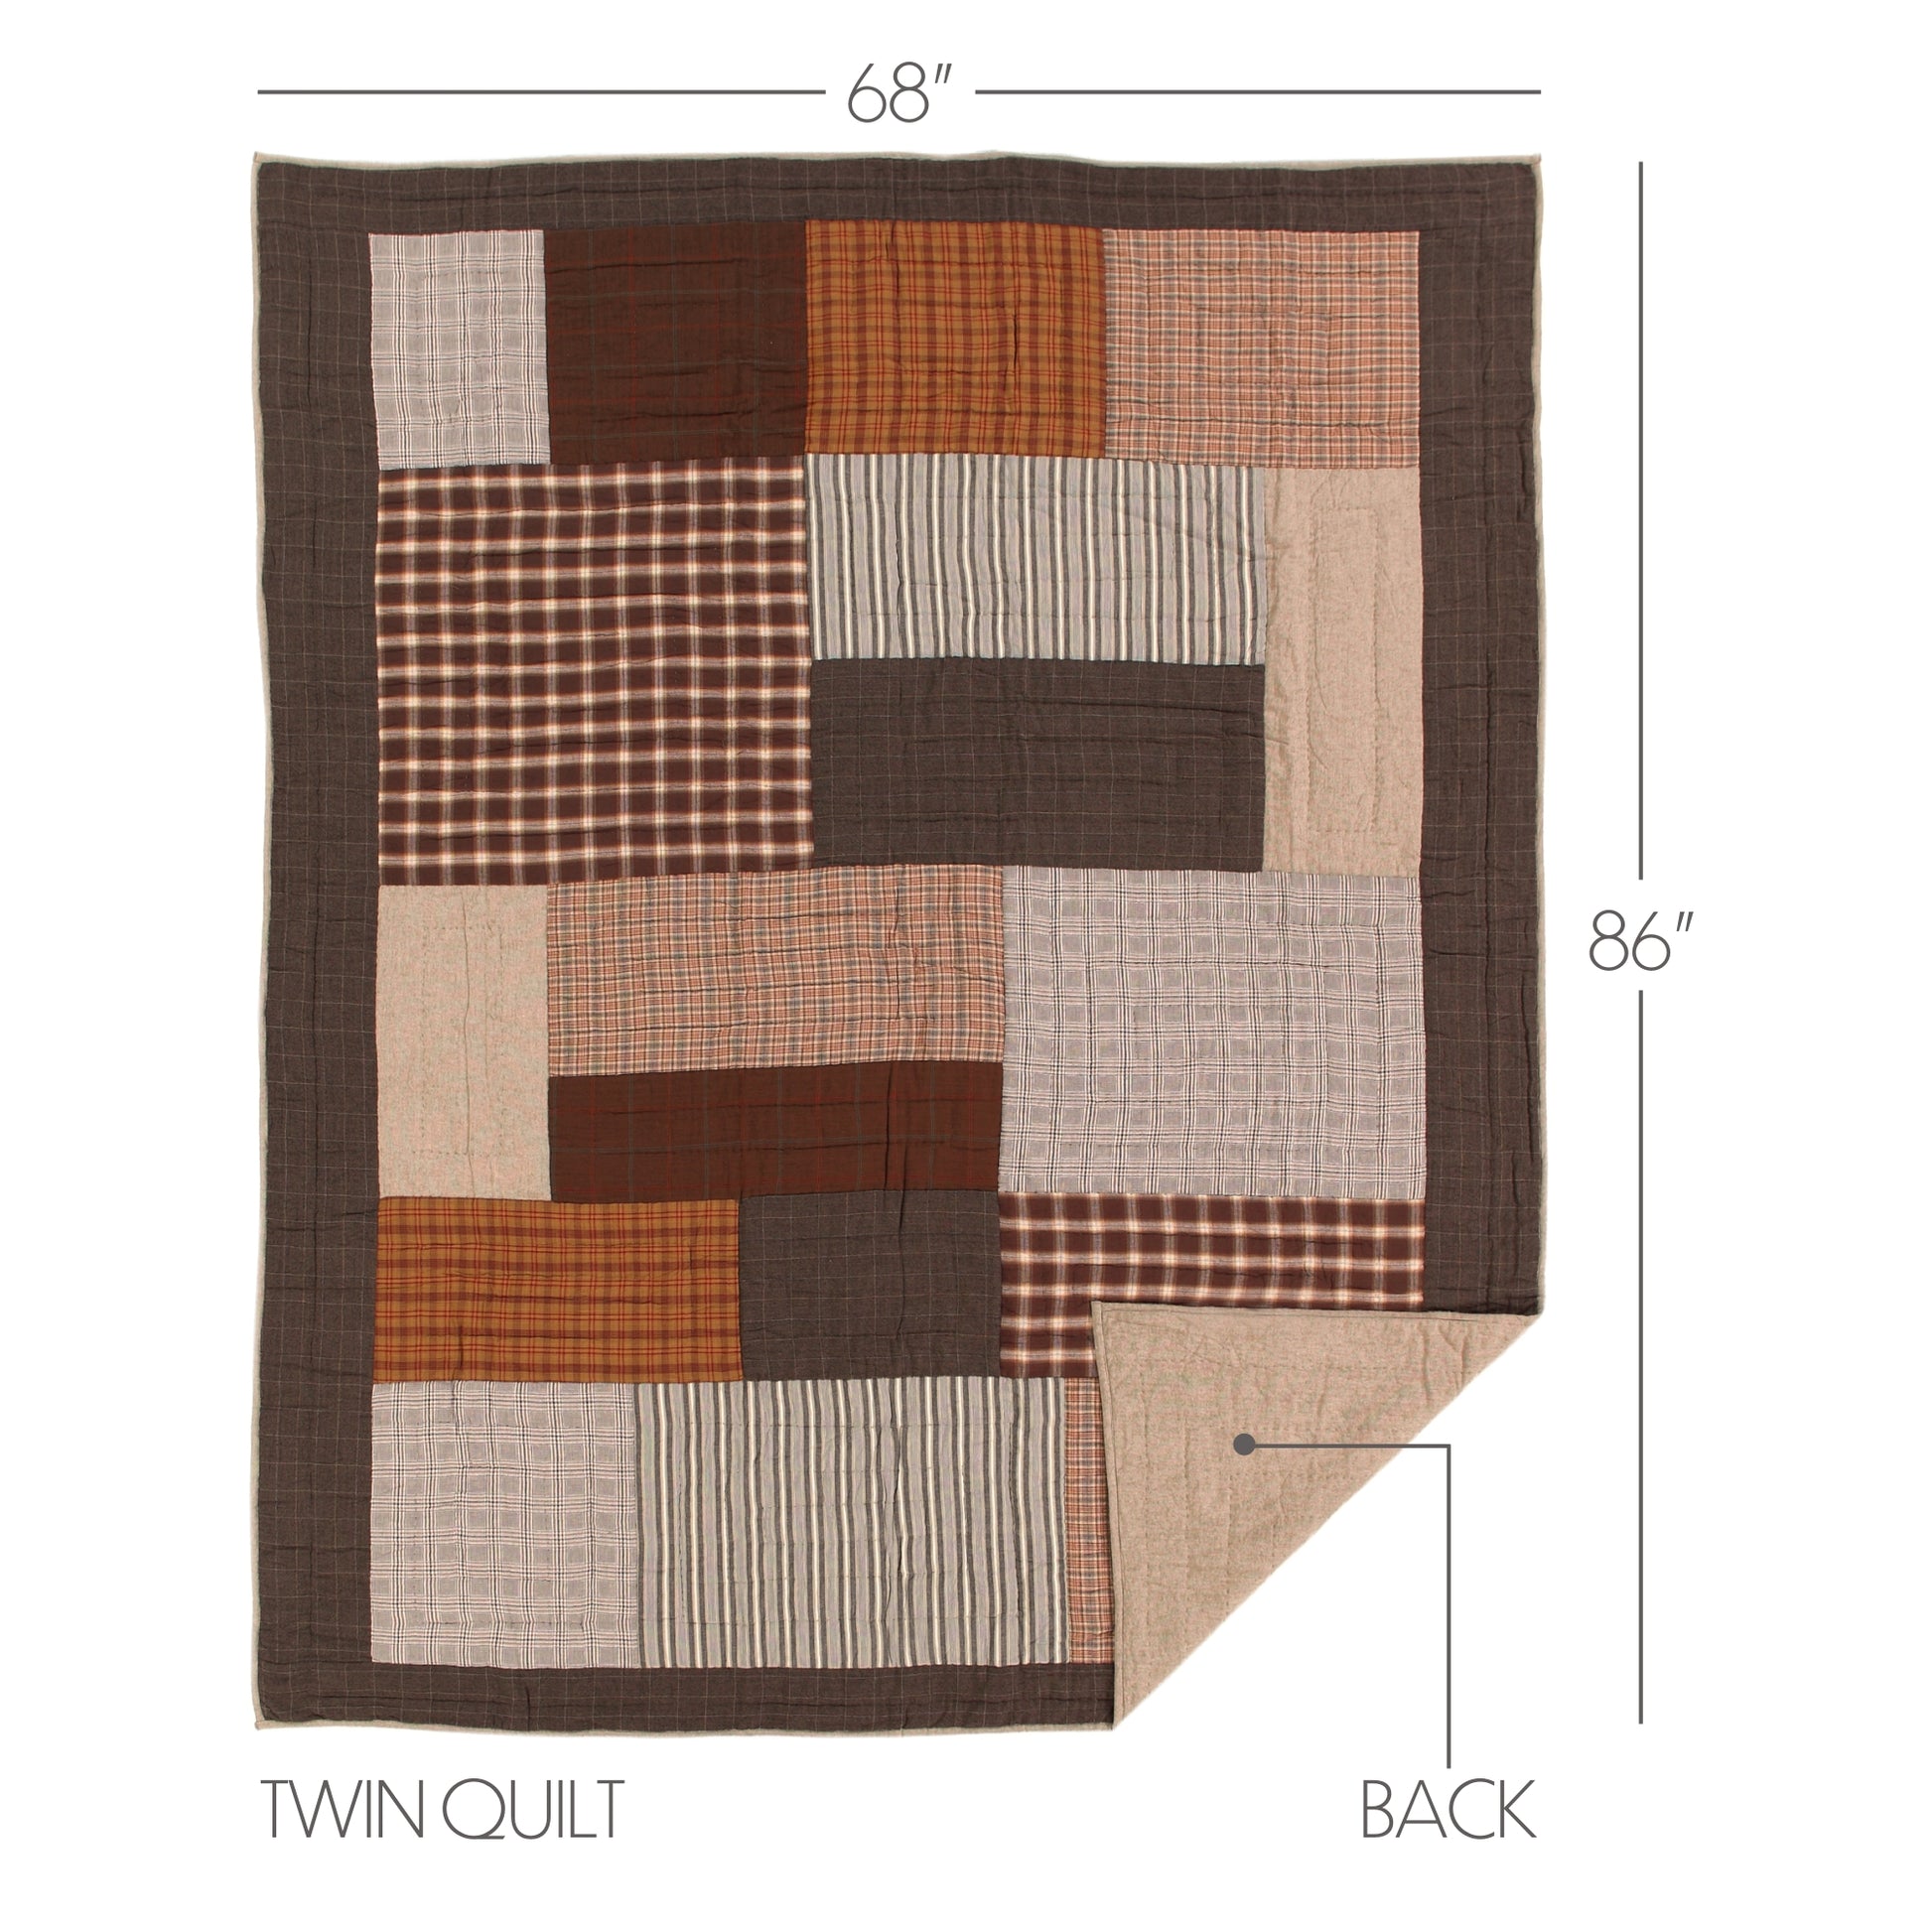 38019-Rory-Twin-Quilt-68Wx86L-image-1